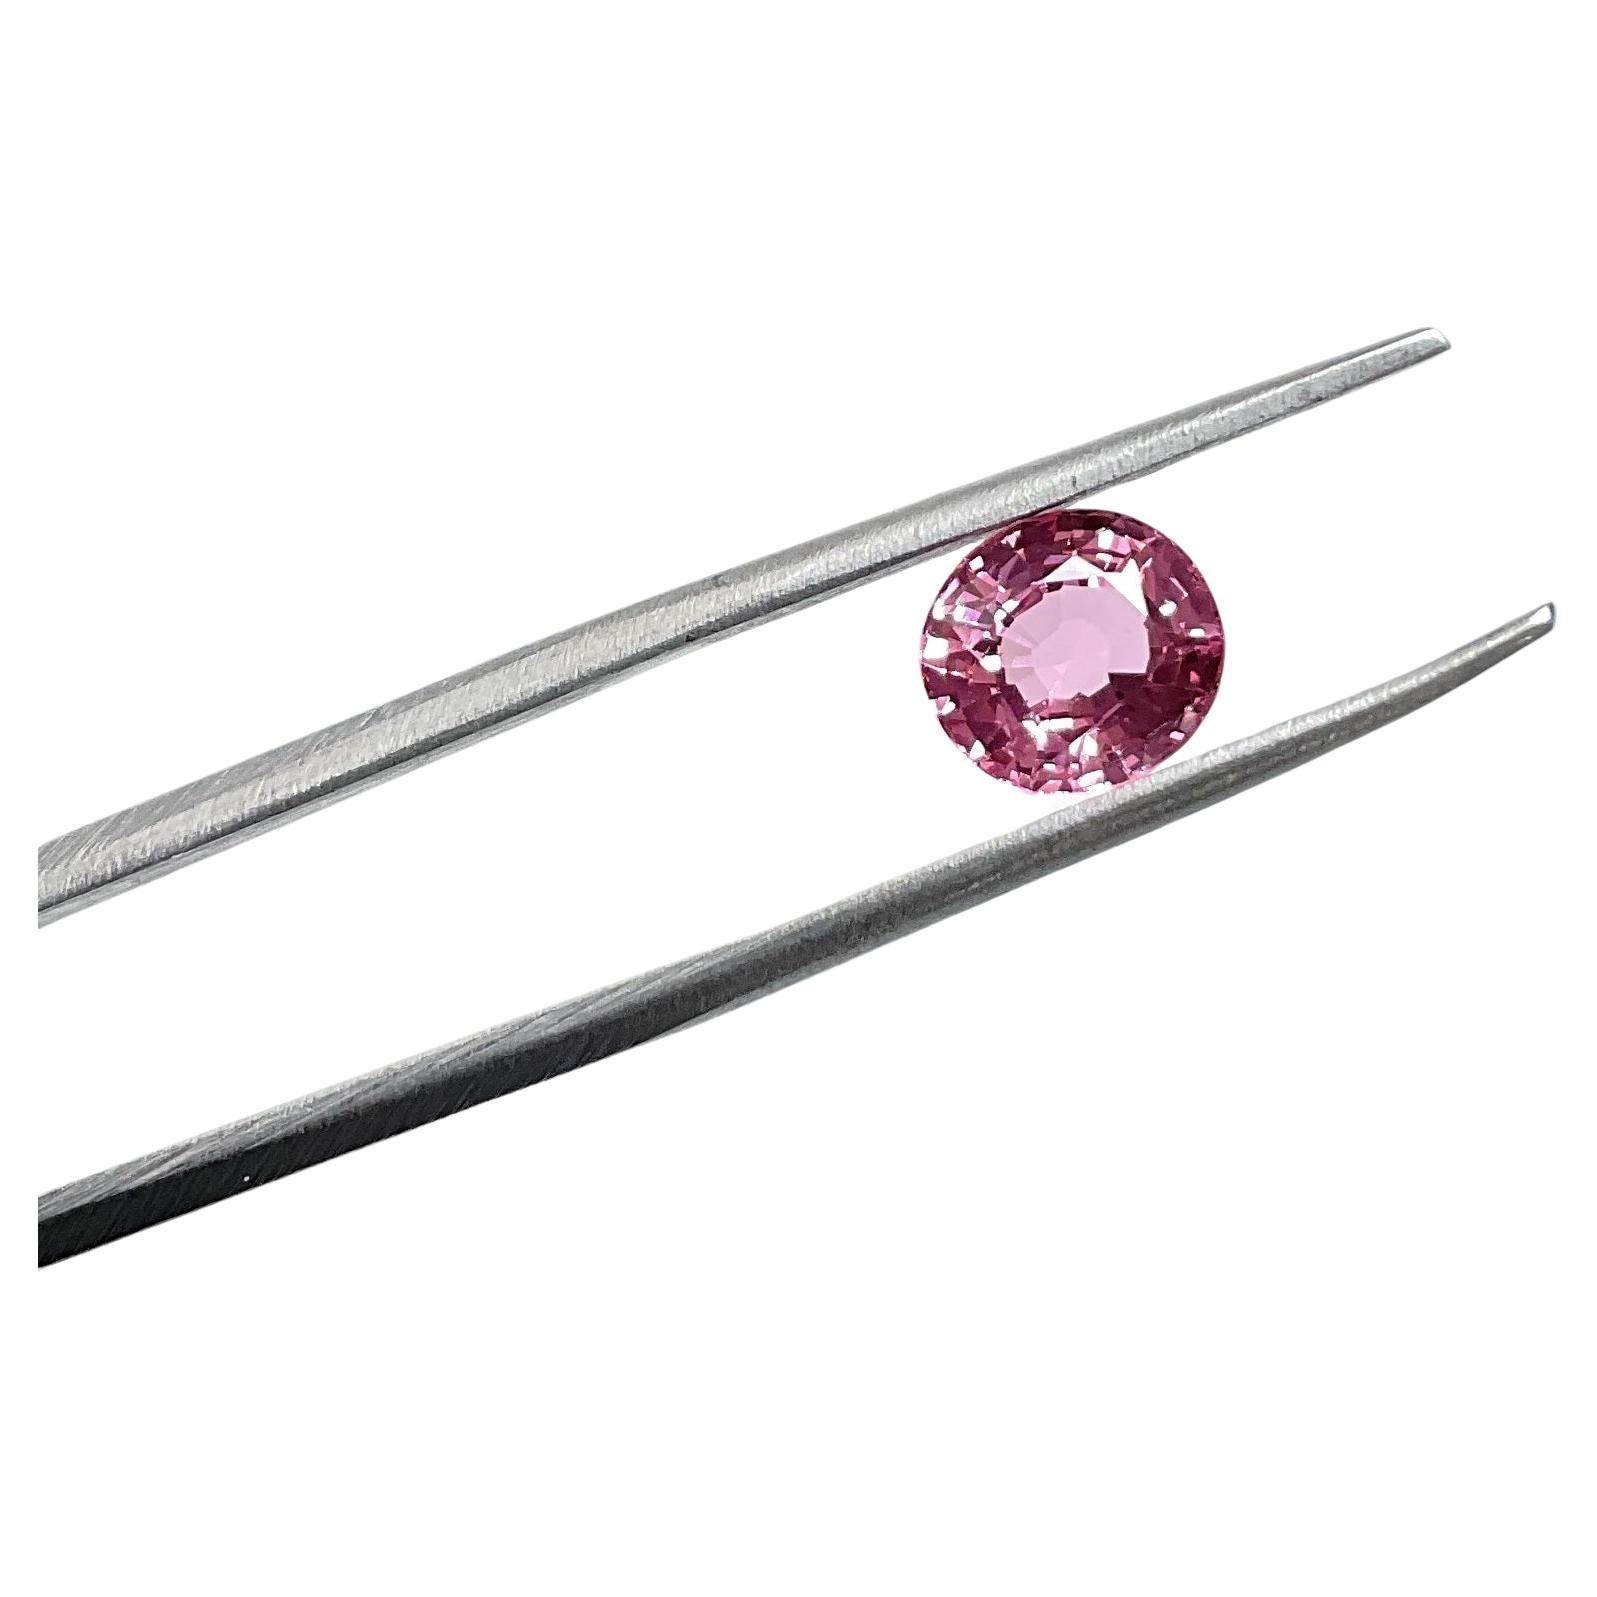 1.86 Carats pinkish burmese spinel cut stone oval natural gemstone top quality   For Sale